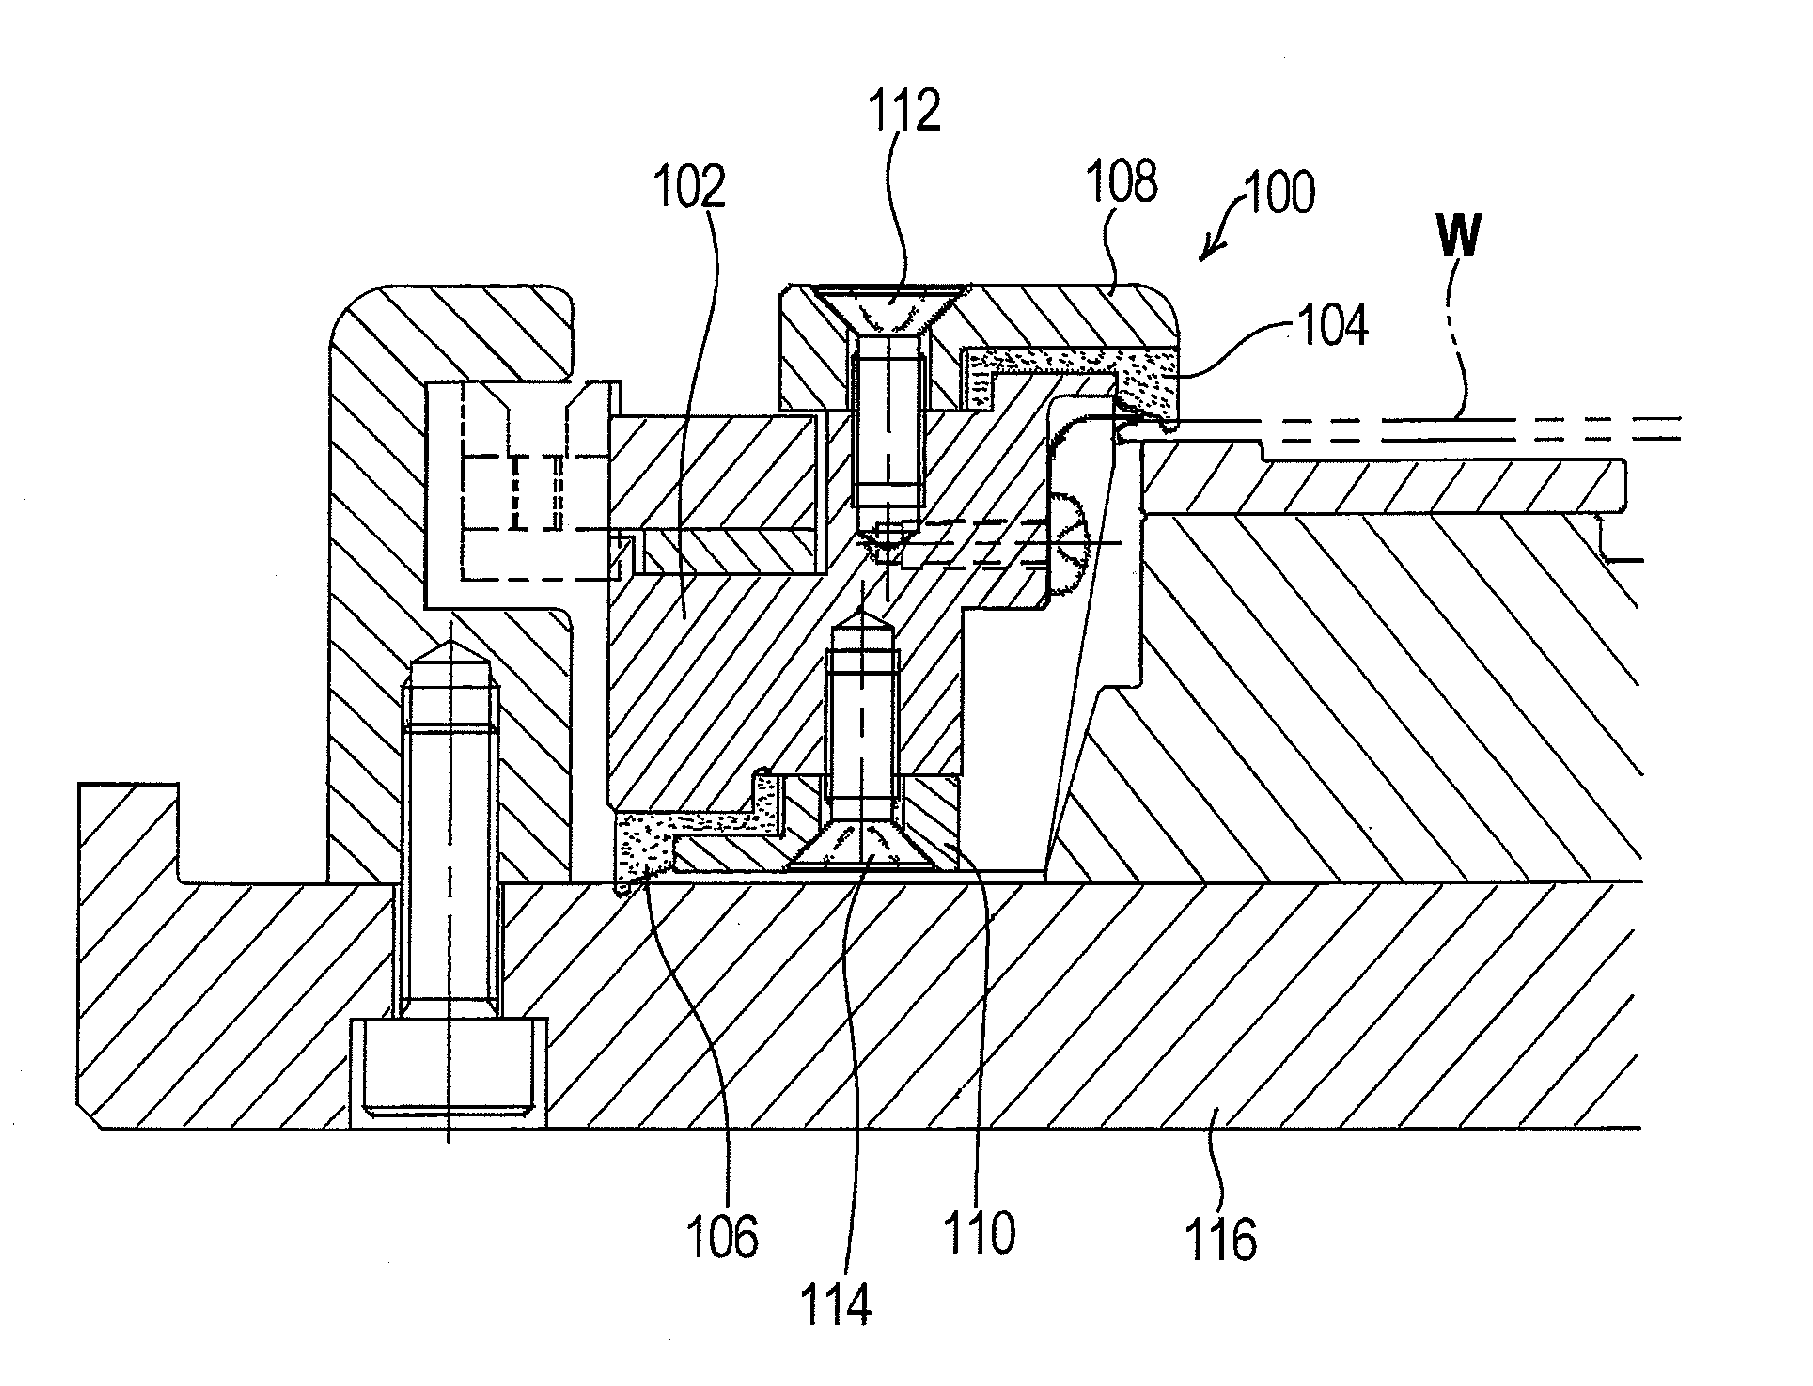 Substrate holder and plating apparatus